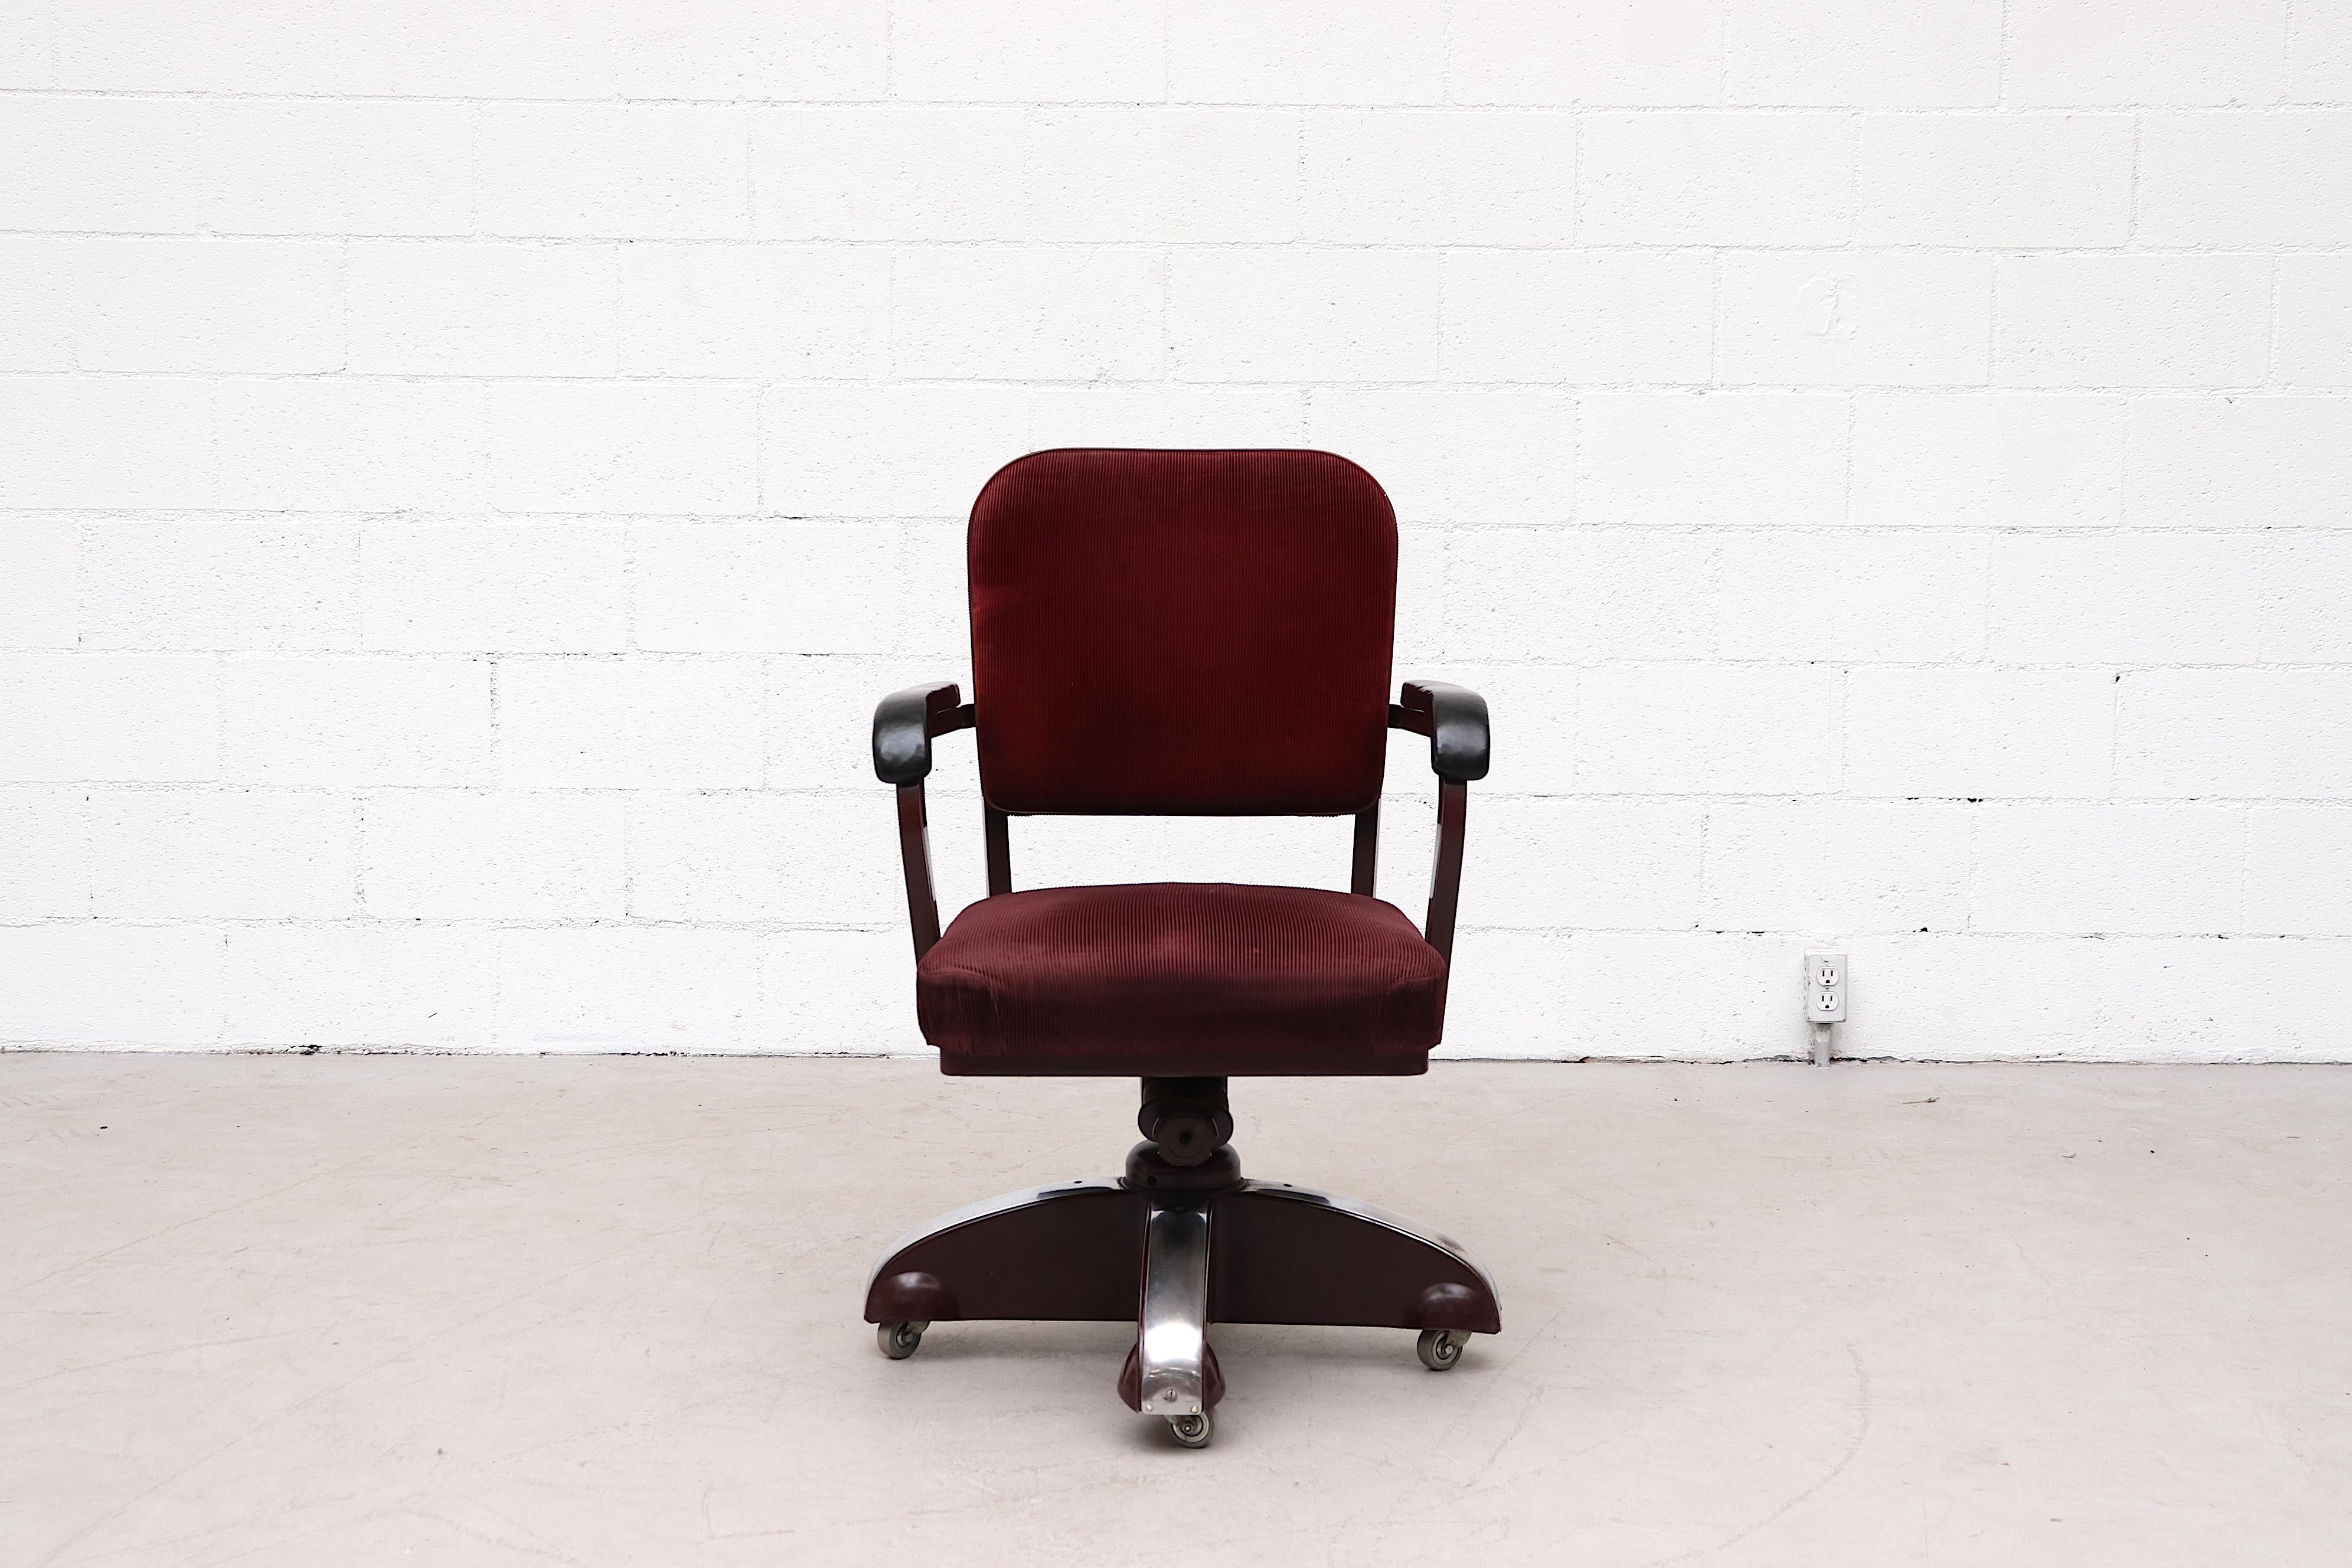 Handsome Ahrend de Cirkel red corduroy rolling office chair with on burgundy enameled meal frame with black leather arm rests and chrome accents. In original condition with moderate wear consistent with age and use.